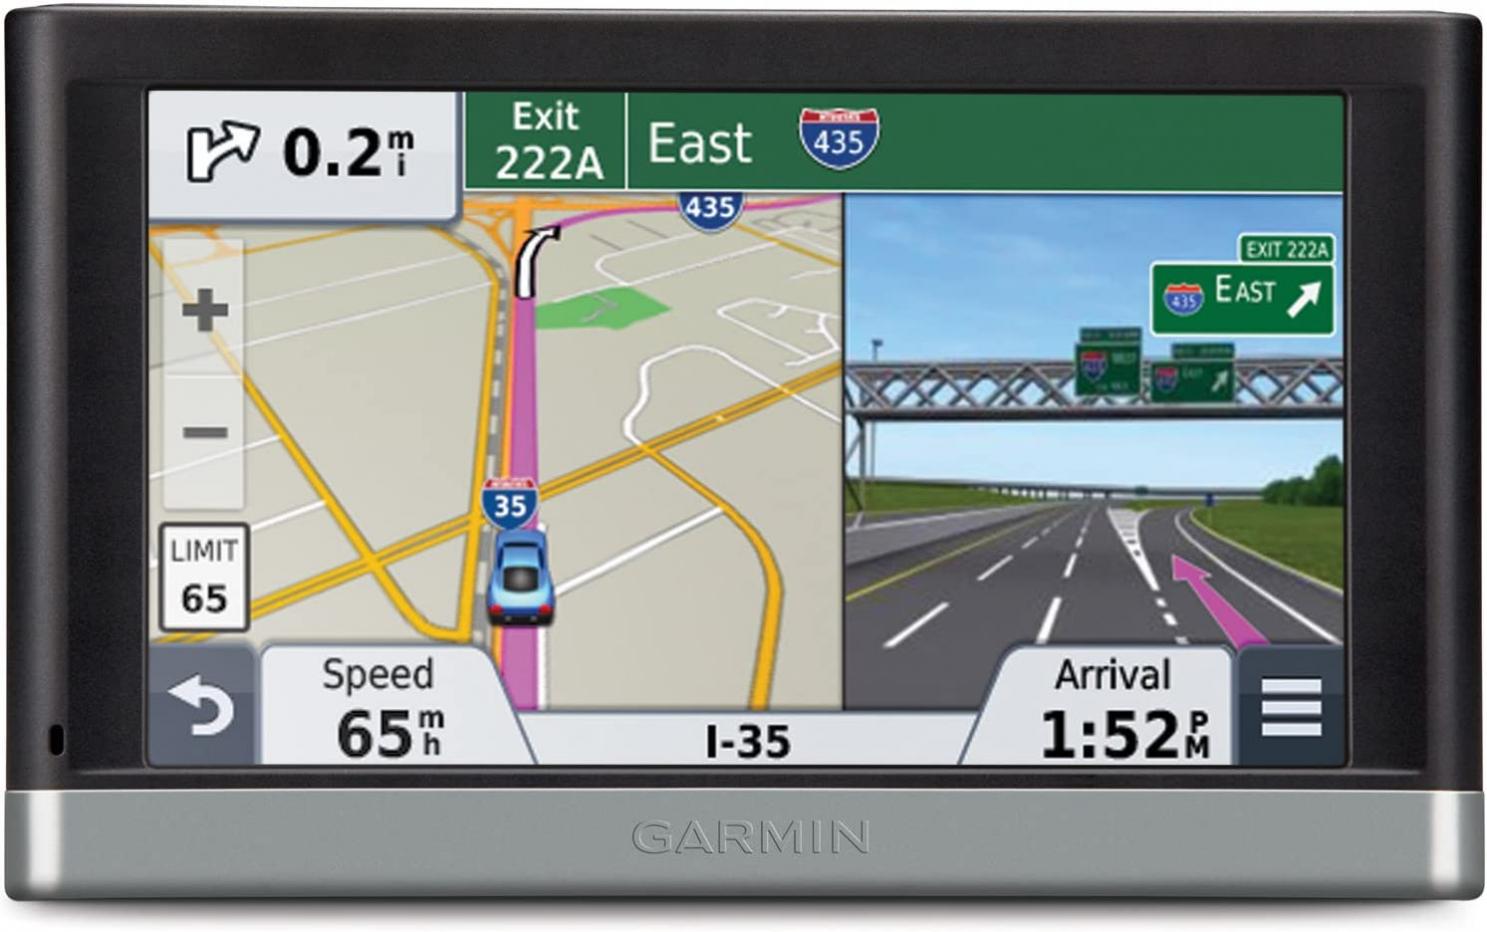 Garmin nüvi 2557LMT 5-Inch Portable Vehicle GPS with Lifetime Maps and Traffic (Discontinued by Manufacturer)